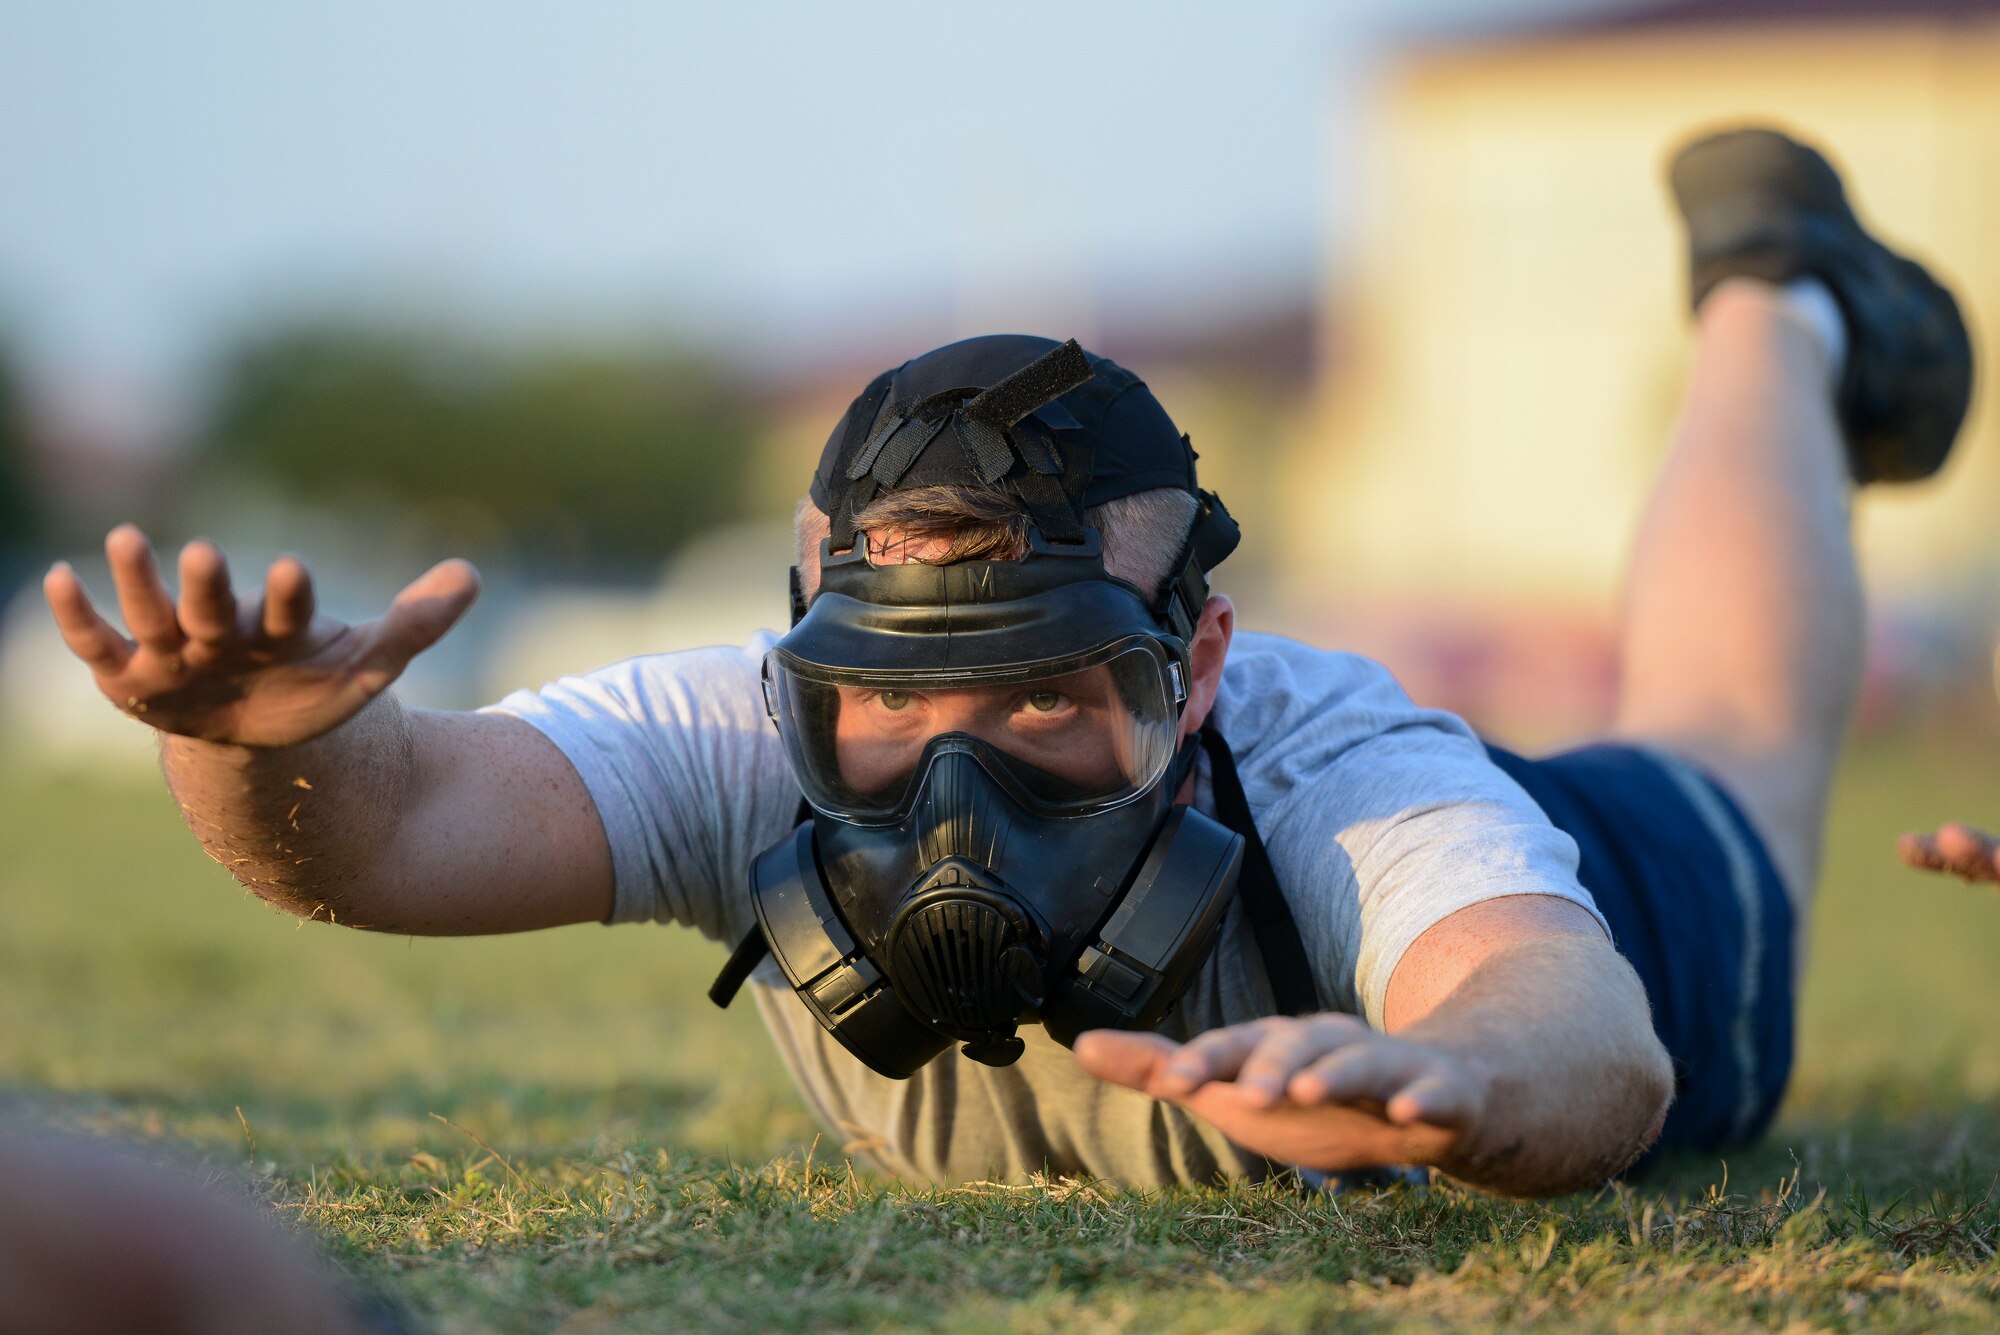 U.S. Air Force Senior Airman William McLaughlin, 502nd Security Forces Squadron, performs a physical training exercise during the Air Education and Training Command’s Defender Challenge team selection July 27, 2018, at Joint Base San Antonio-Randolph, Texas. Defender Challenge is a Security Forces competition that pits teams against each other in realistic weapons, dismounted operations and relay challenge events.